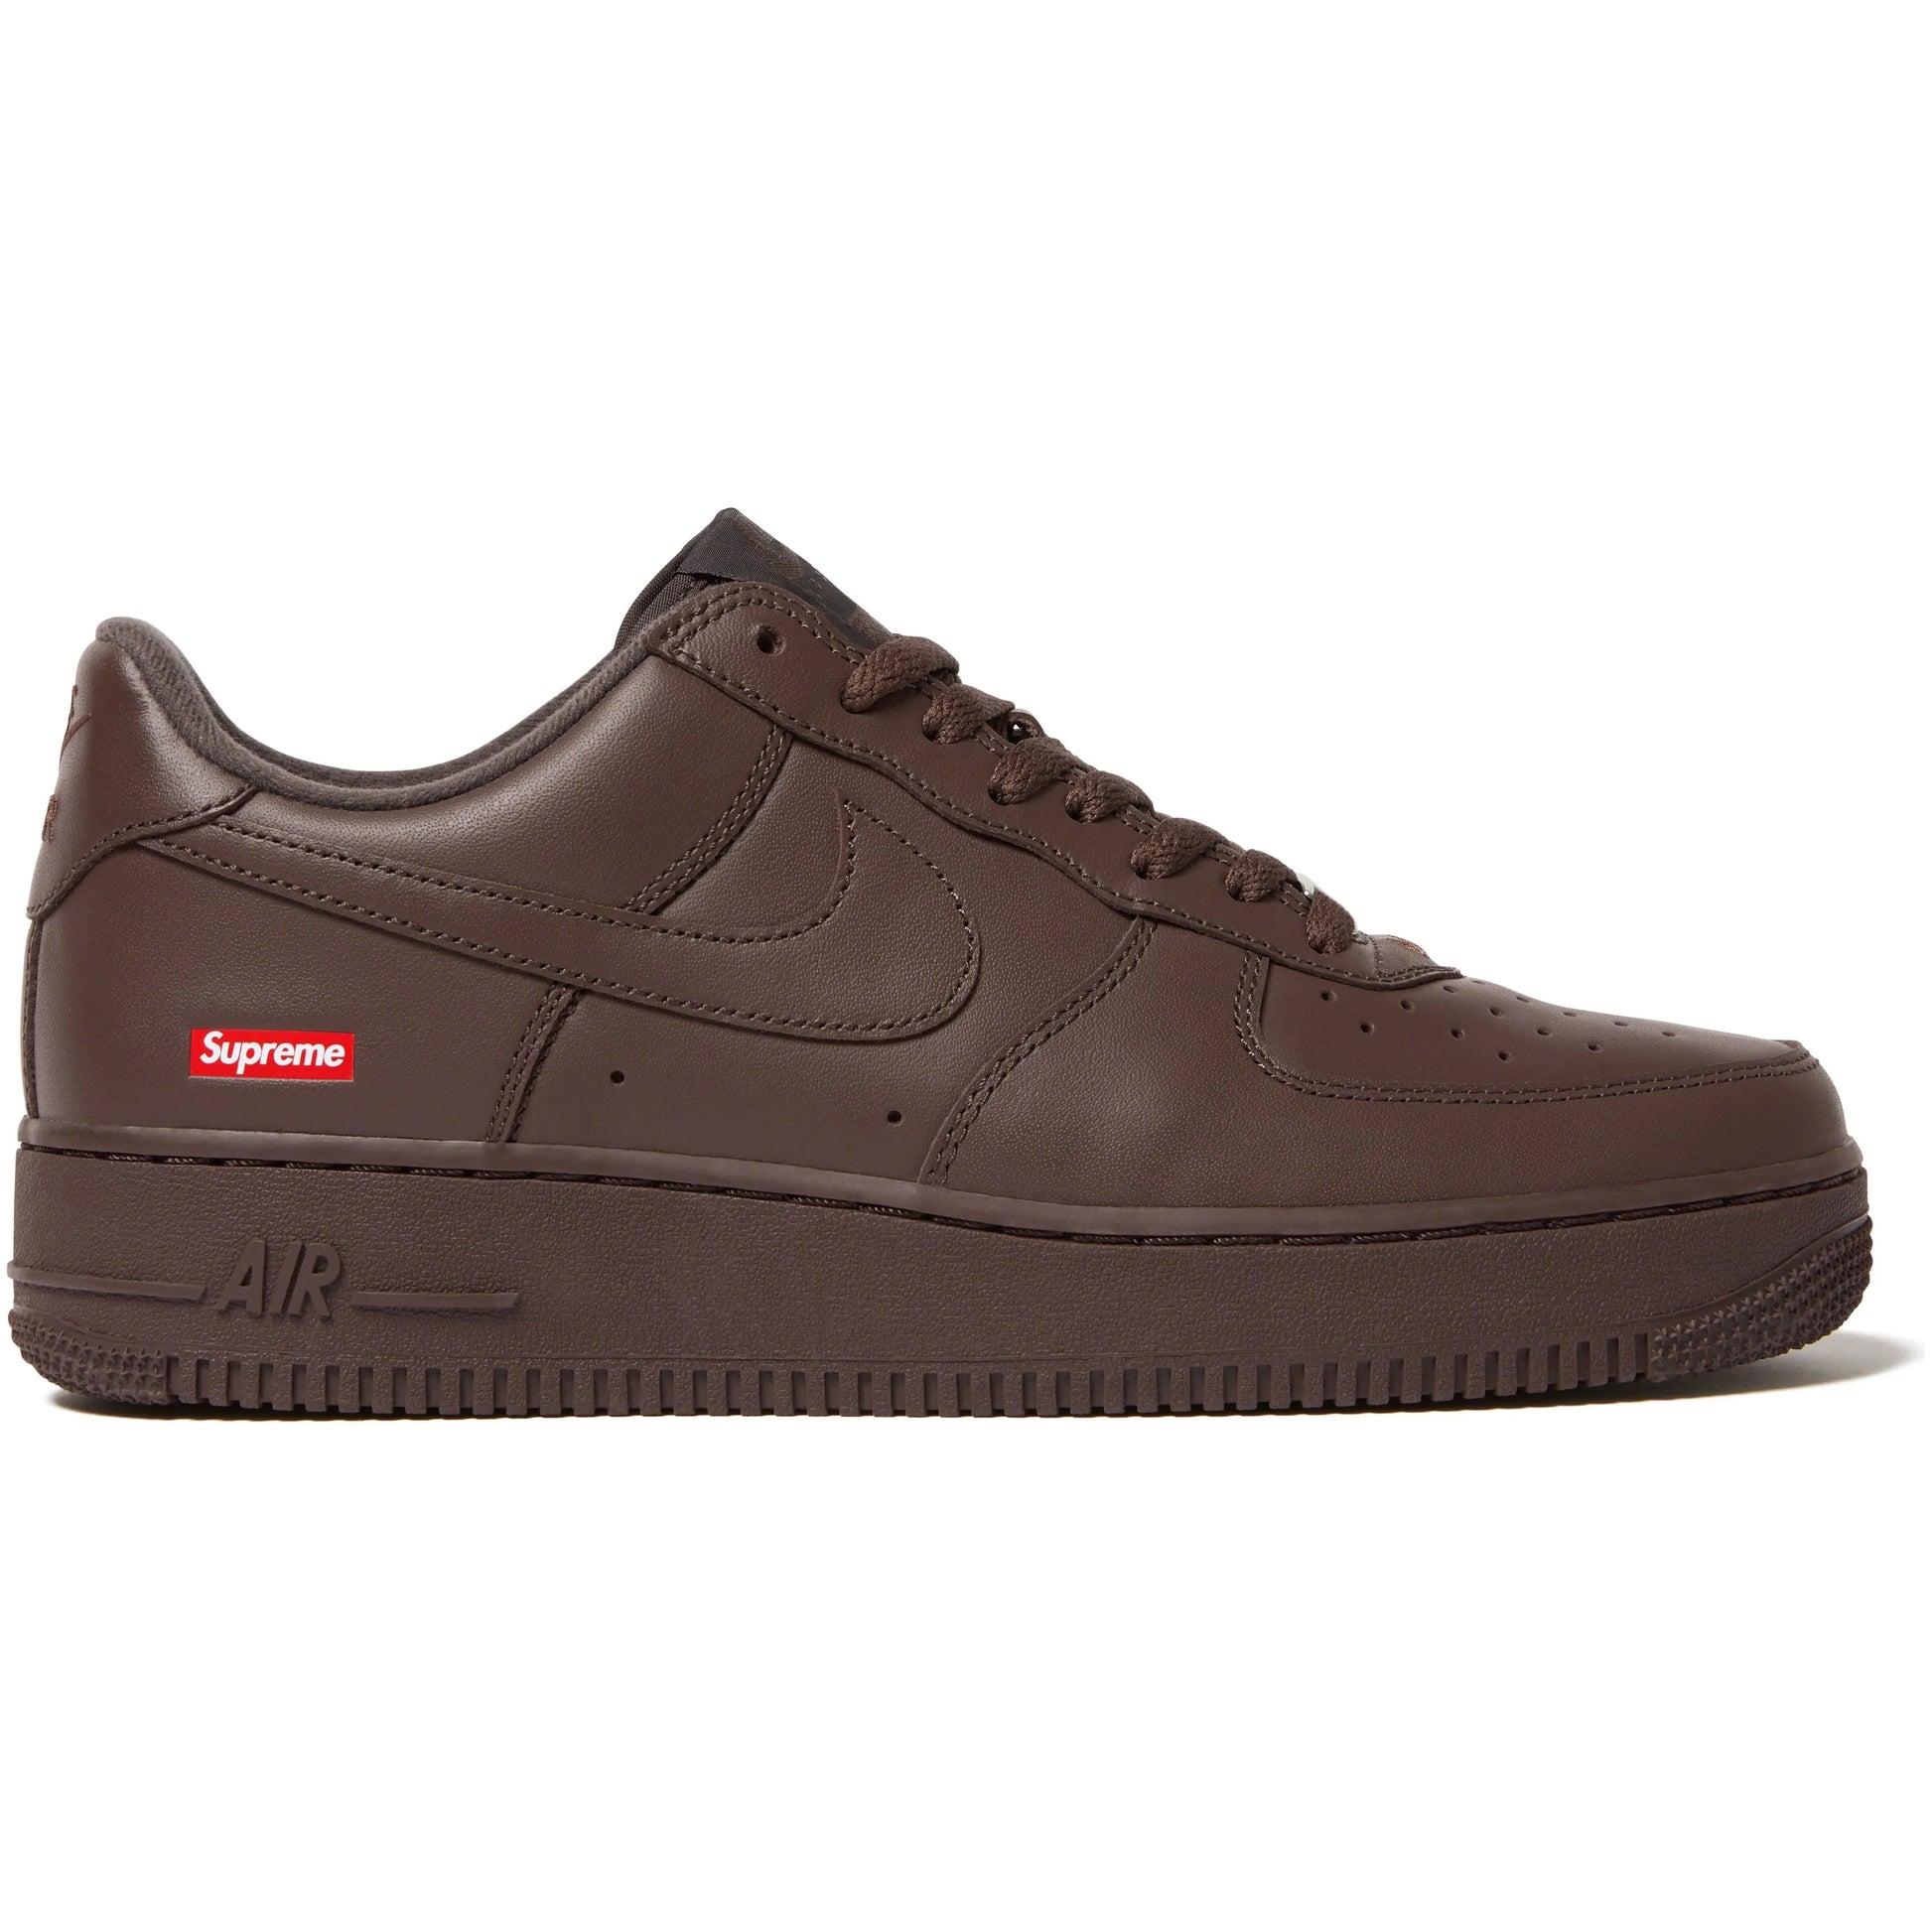 Nike Air Force 1 Low Supreme Baroque Brown from Nike